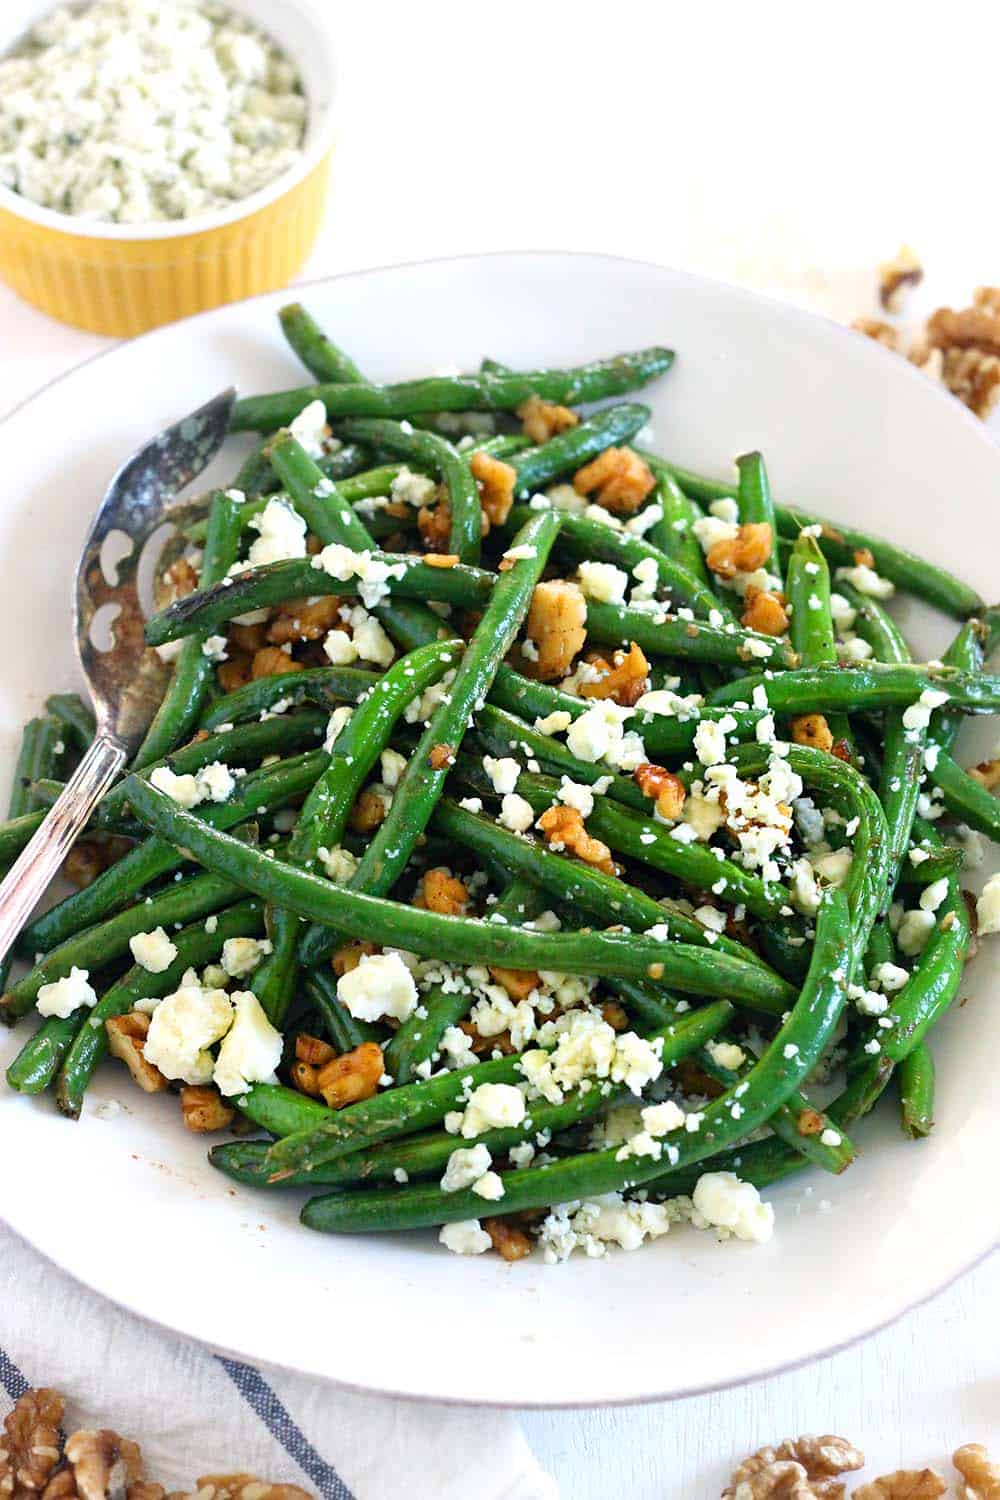 Green Beans Sautéed until crisp-tender, garnished with bleu cheese crumbles and chopped walnuts. This is a delicious way to eat more healthy greens, it takes 10 minutes, and it's healthy, gluten-free, and easy to make. Goes perfectly with anything buffalo flavored!